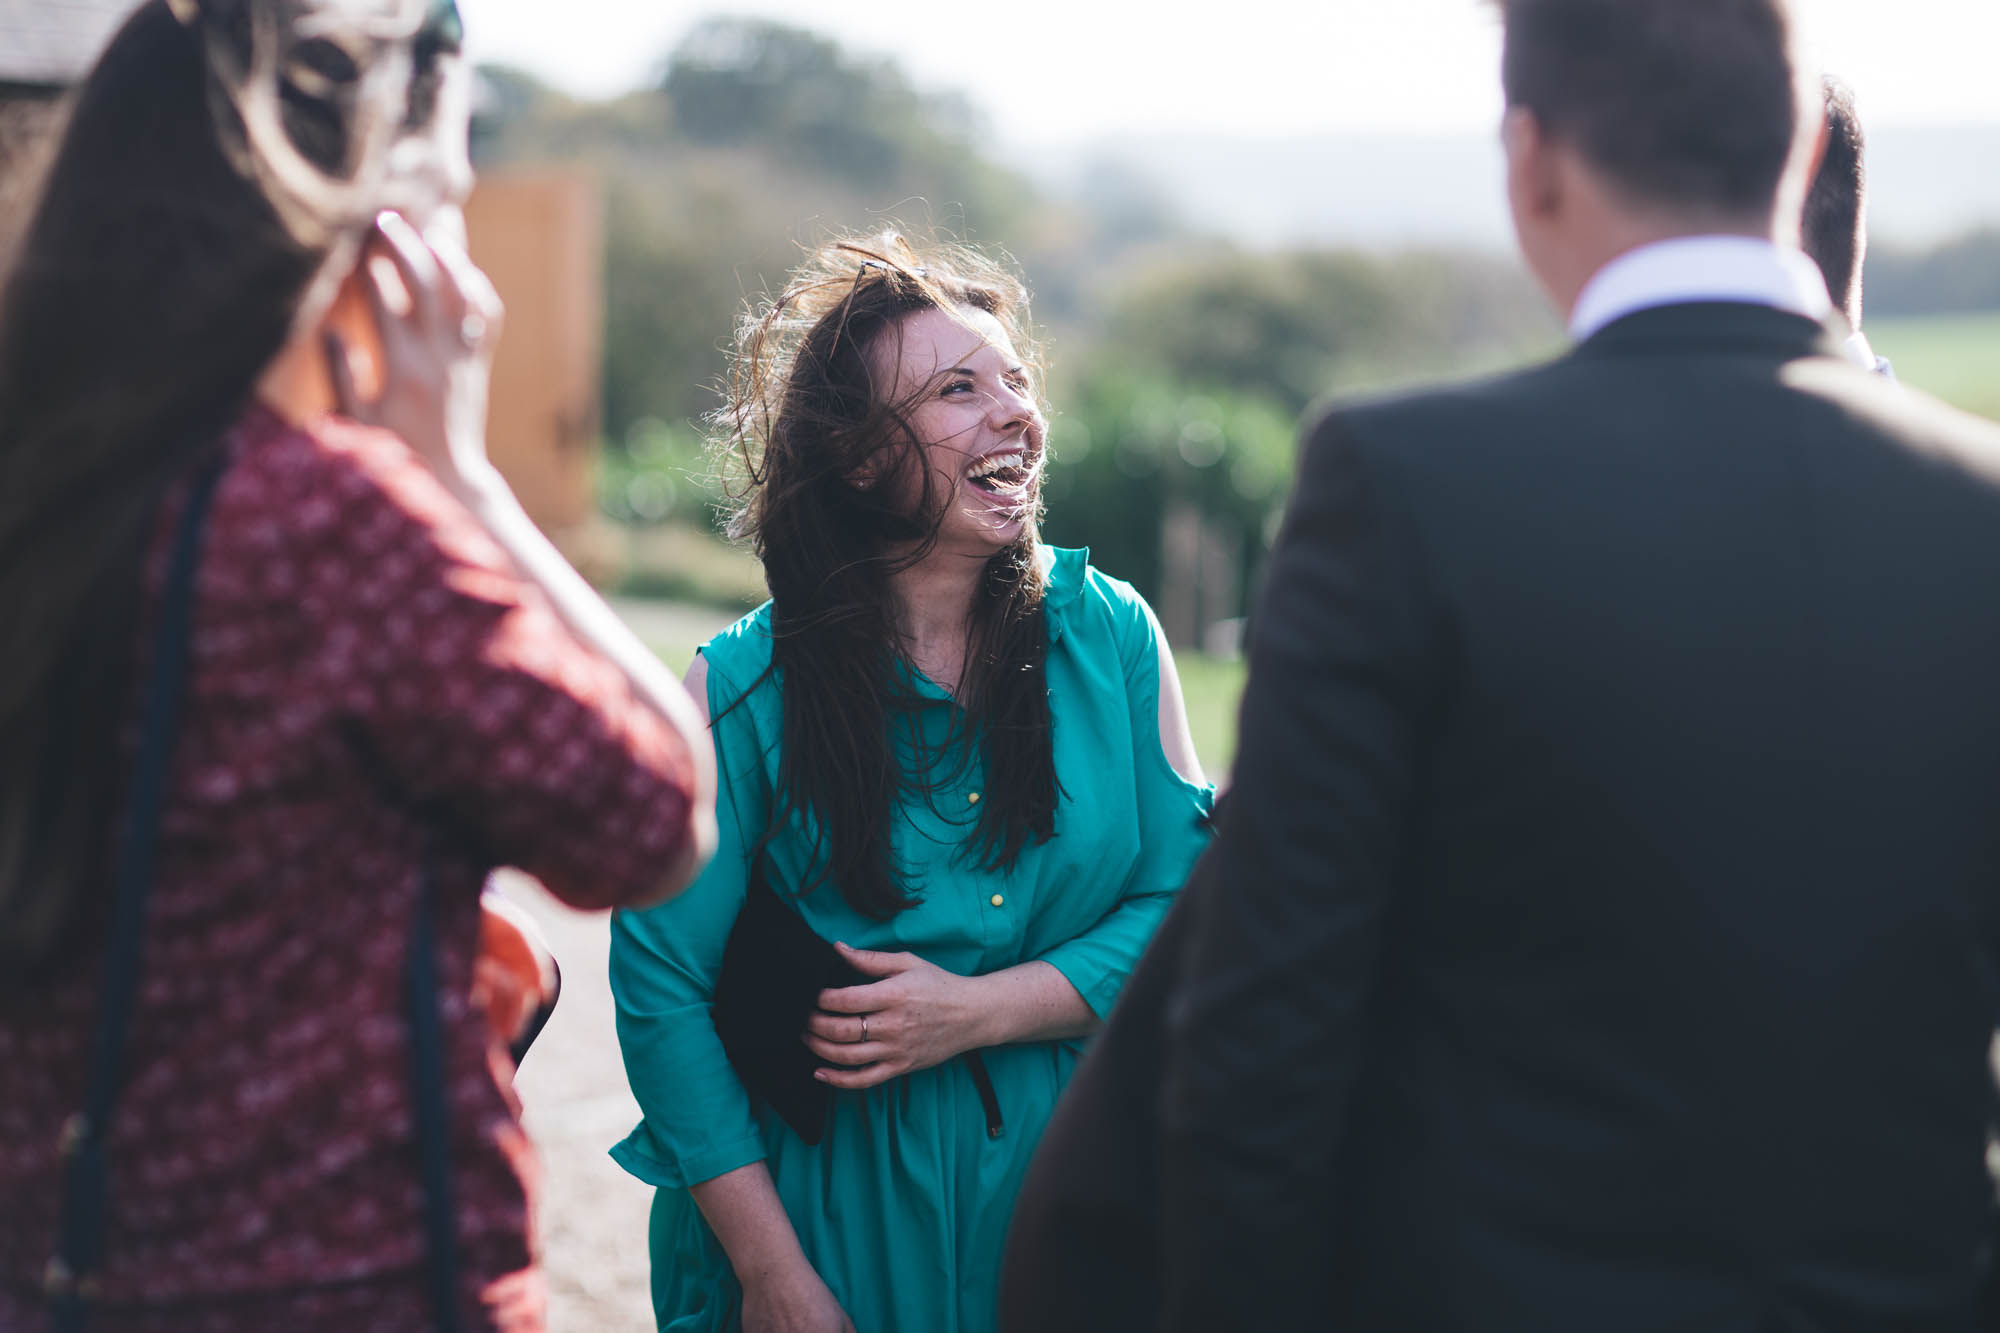 fun candid shot of wedding guest laughing